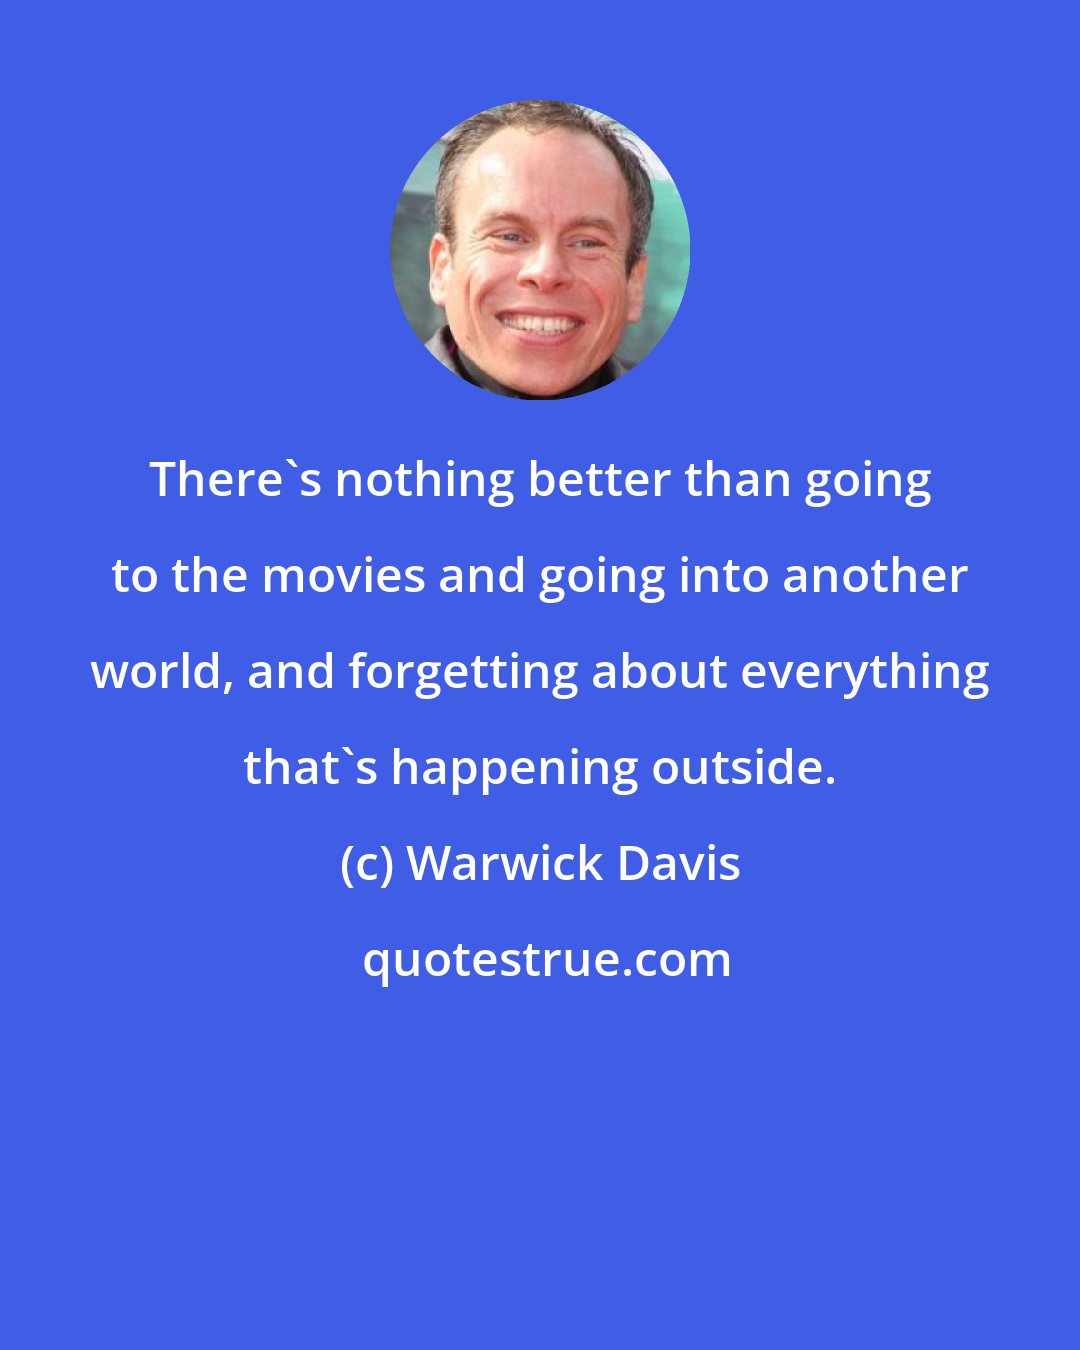 Warwick Davis: There's nothing better than going to the movies and going into another world, and forgetting about everything that's happening outside.